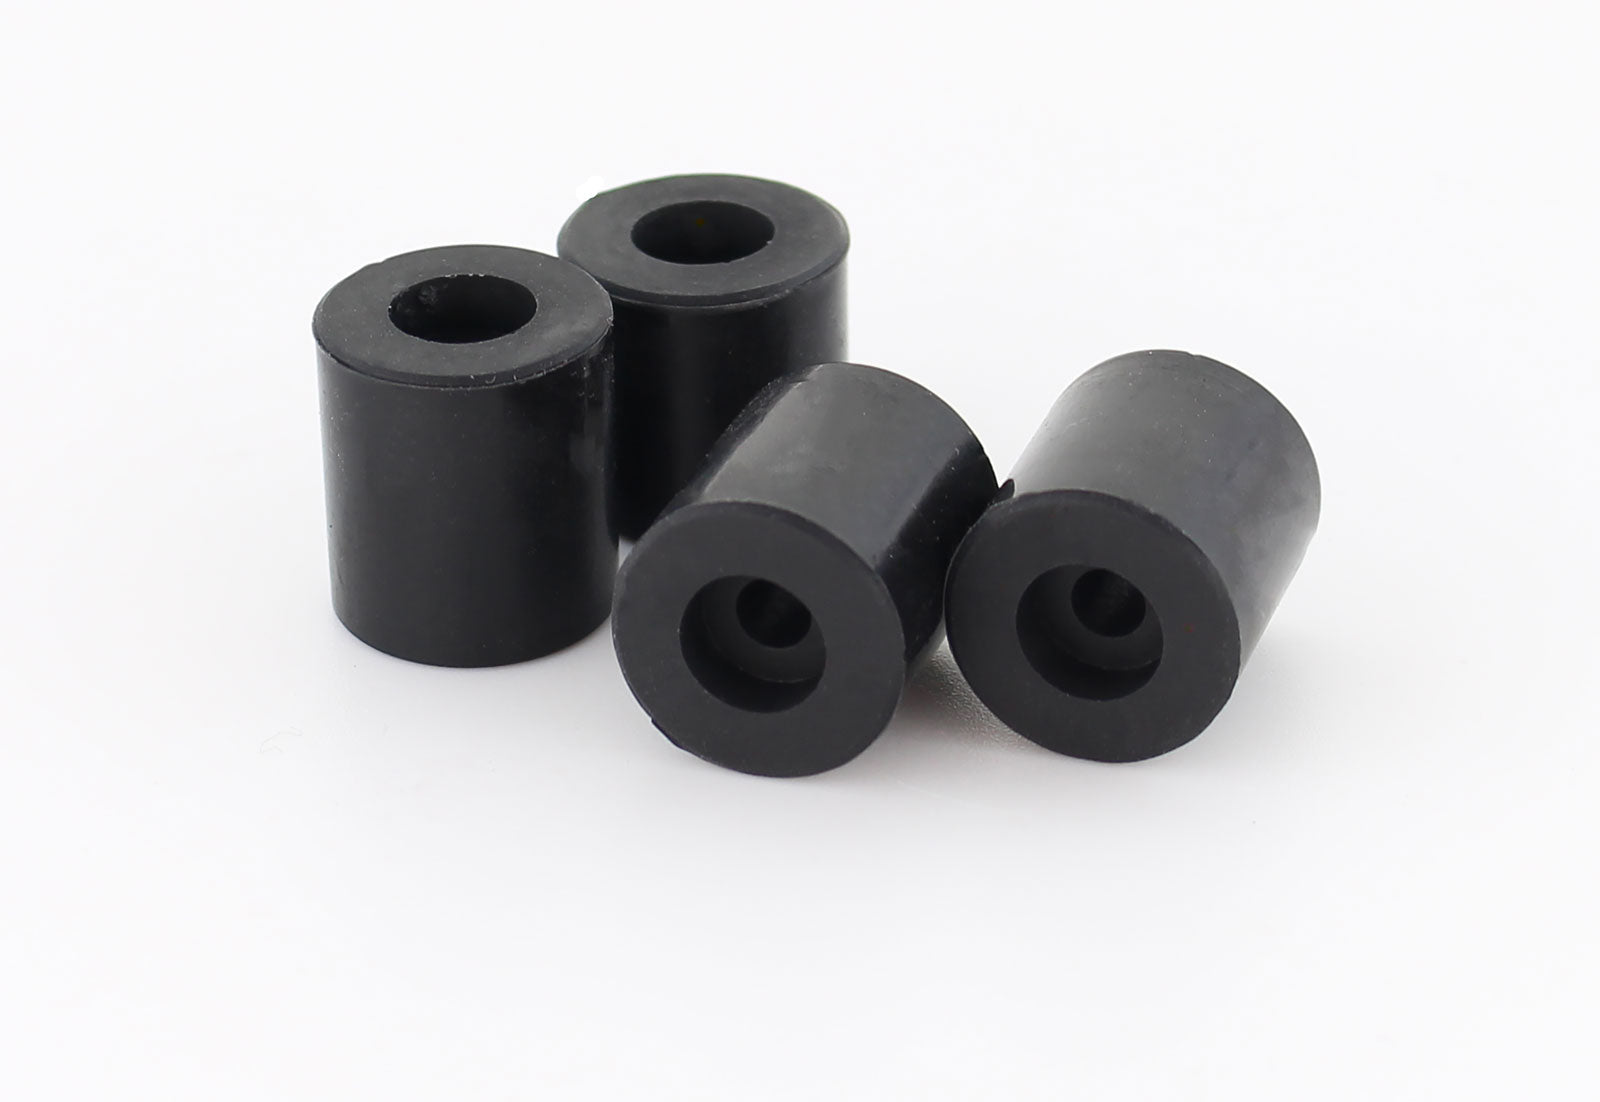 Silicon Heatbed Leveling Spacer Pack (4 pcs)